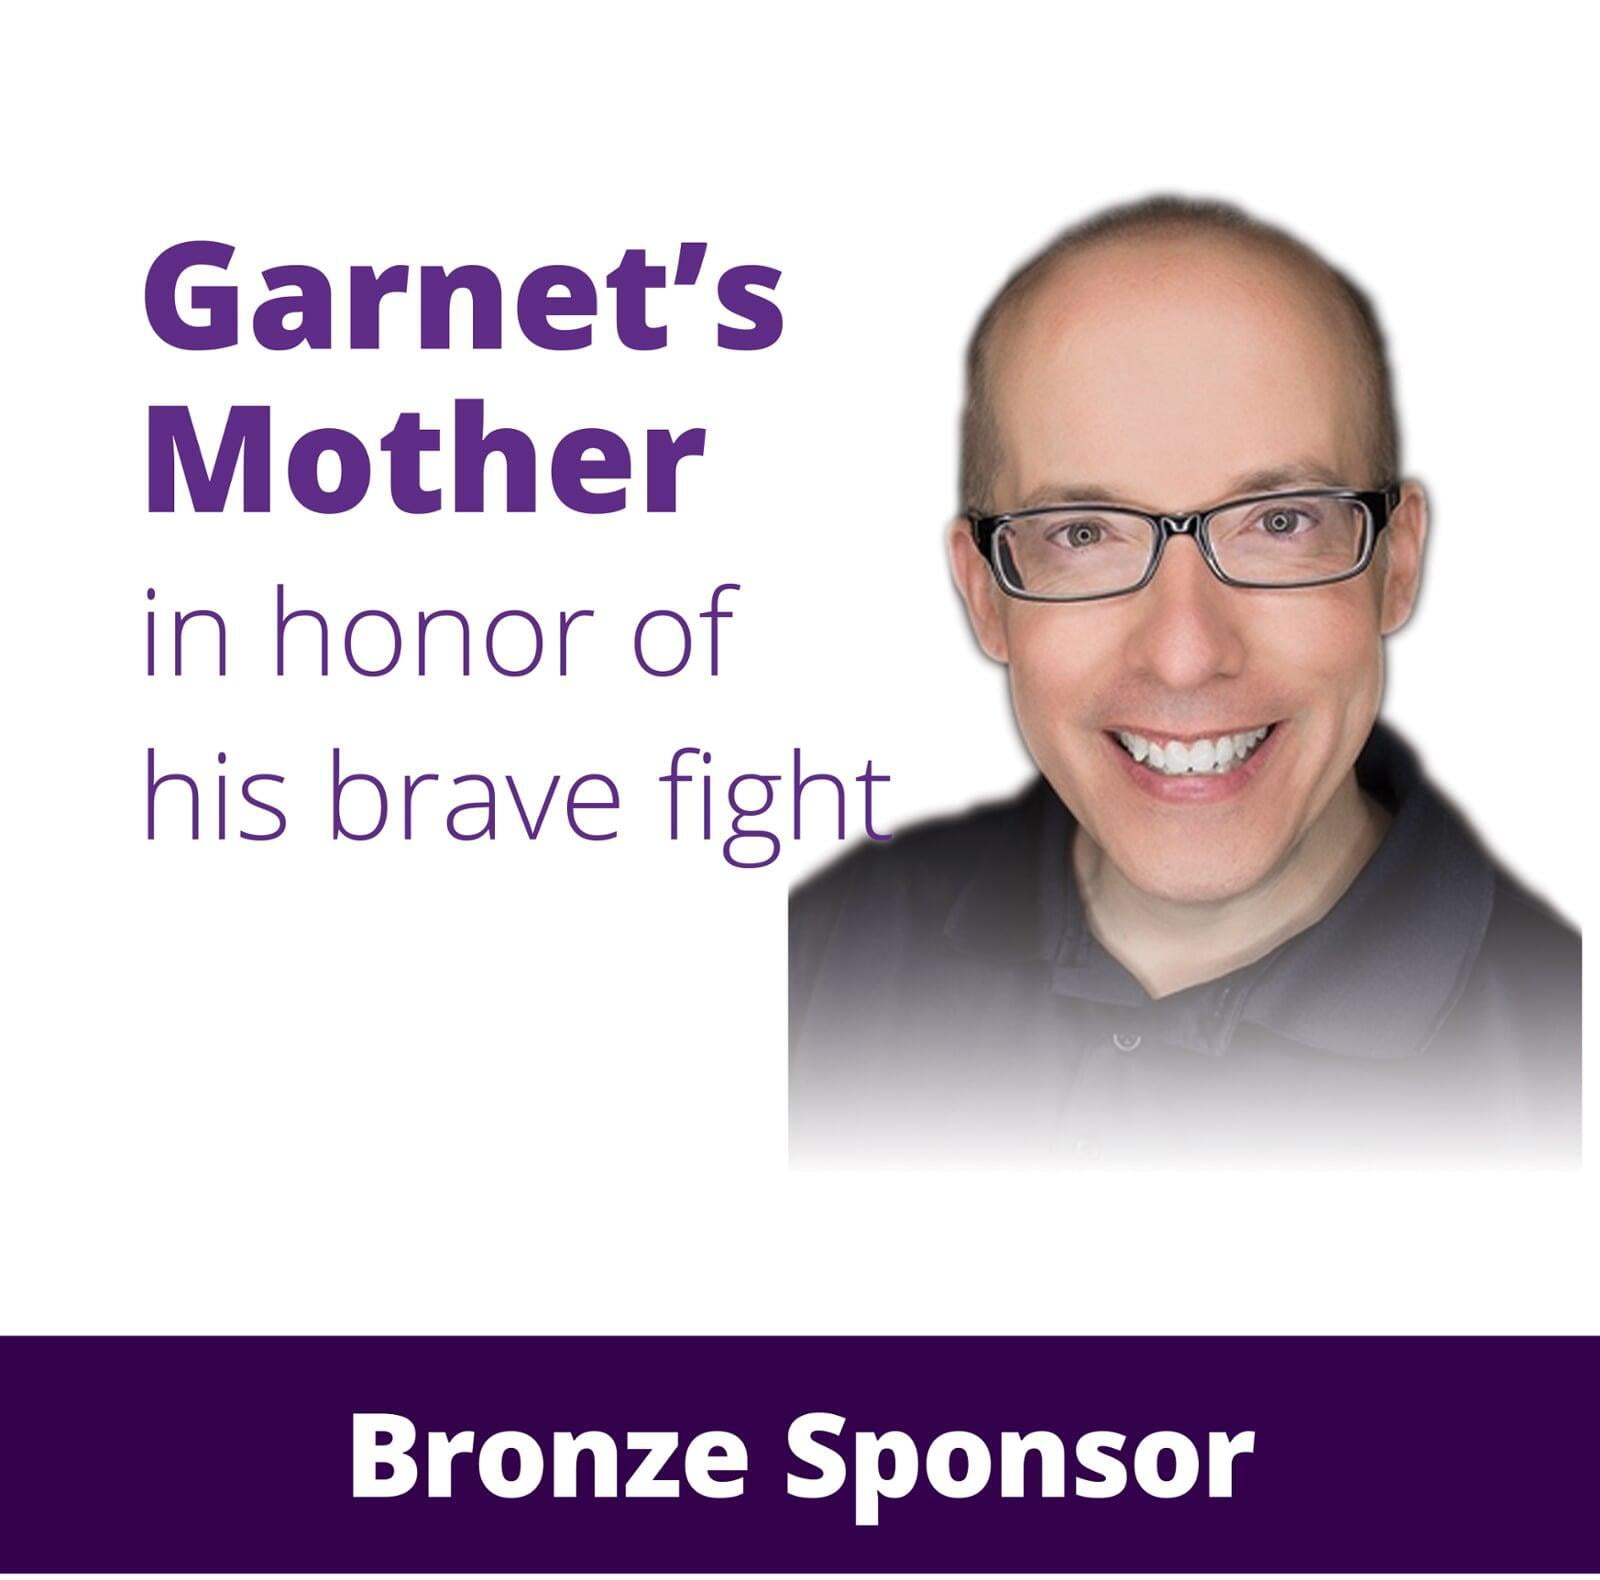 Garnet's Mother in honor of his brave fight with a photo of Garnet Stevens